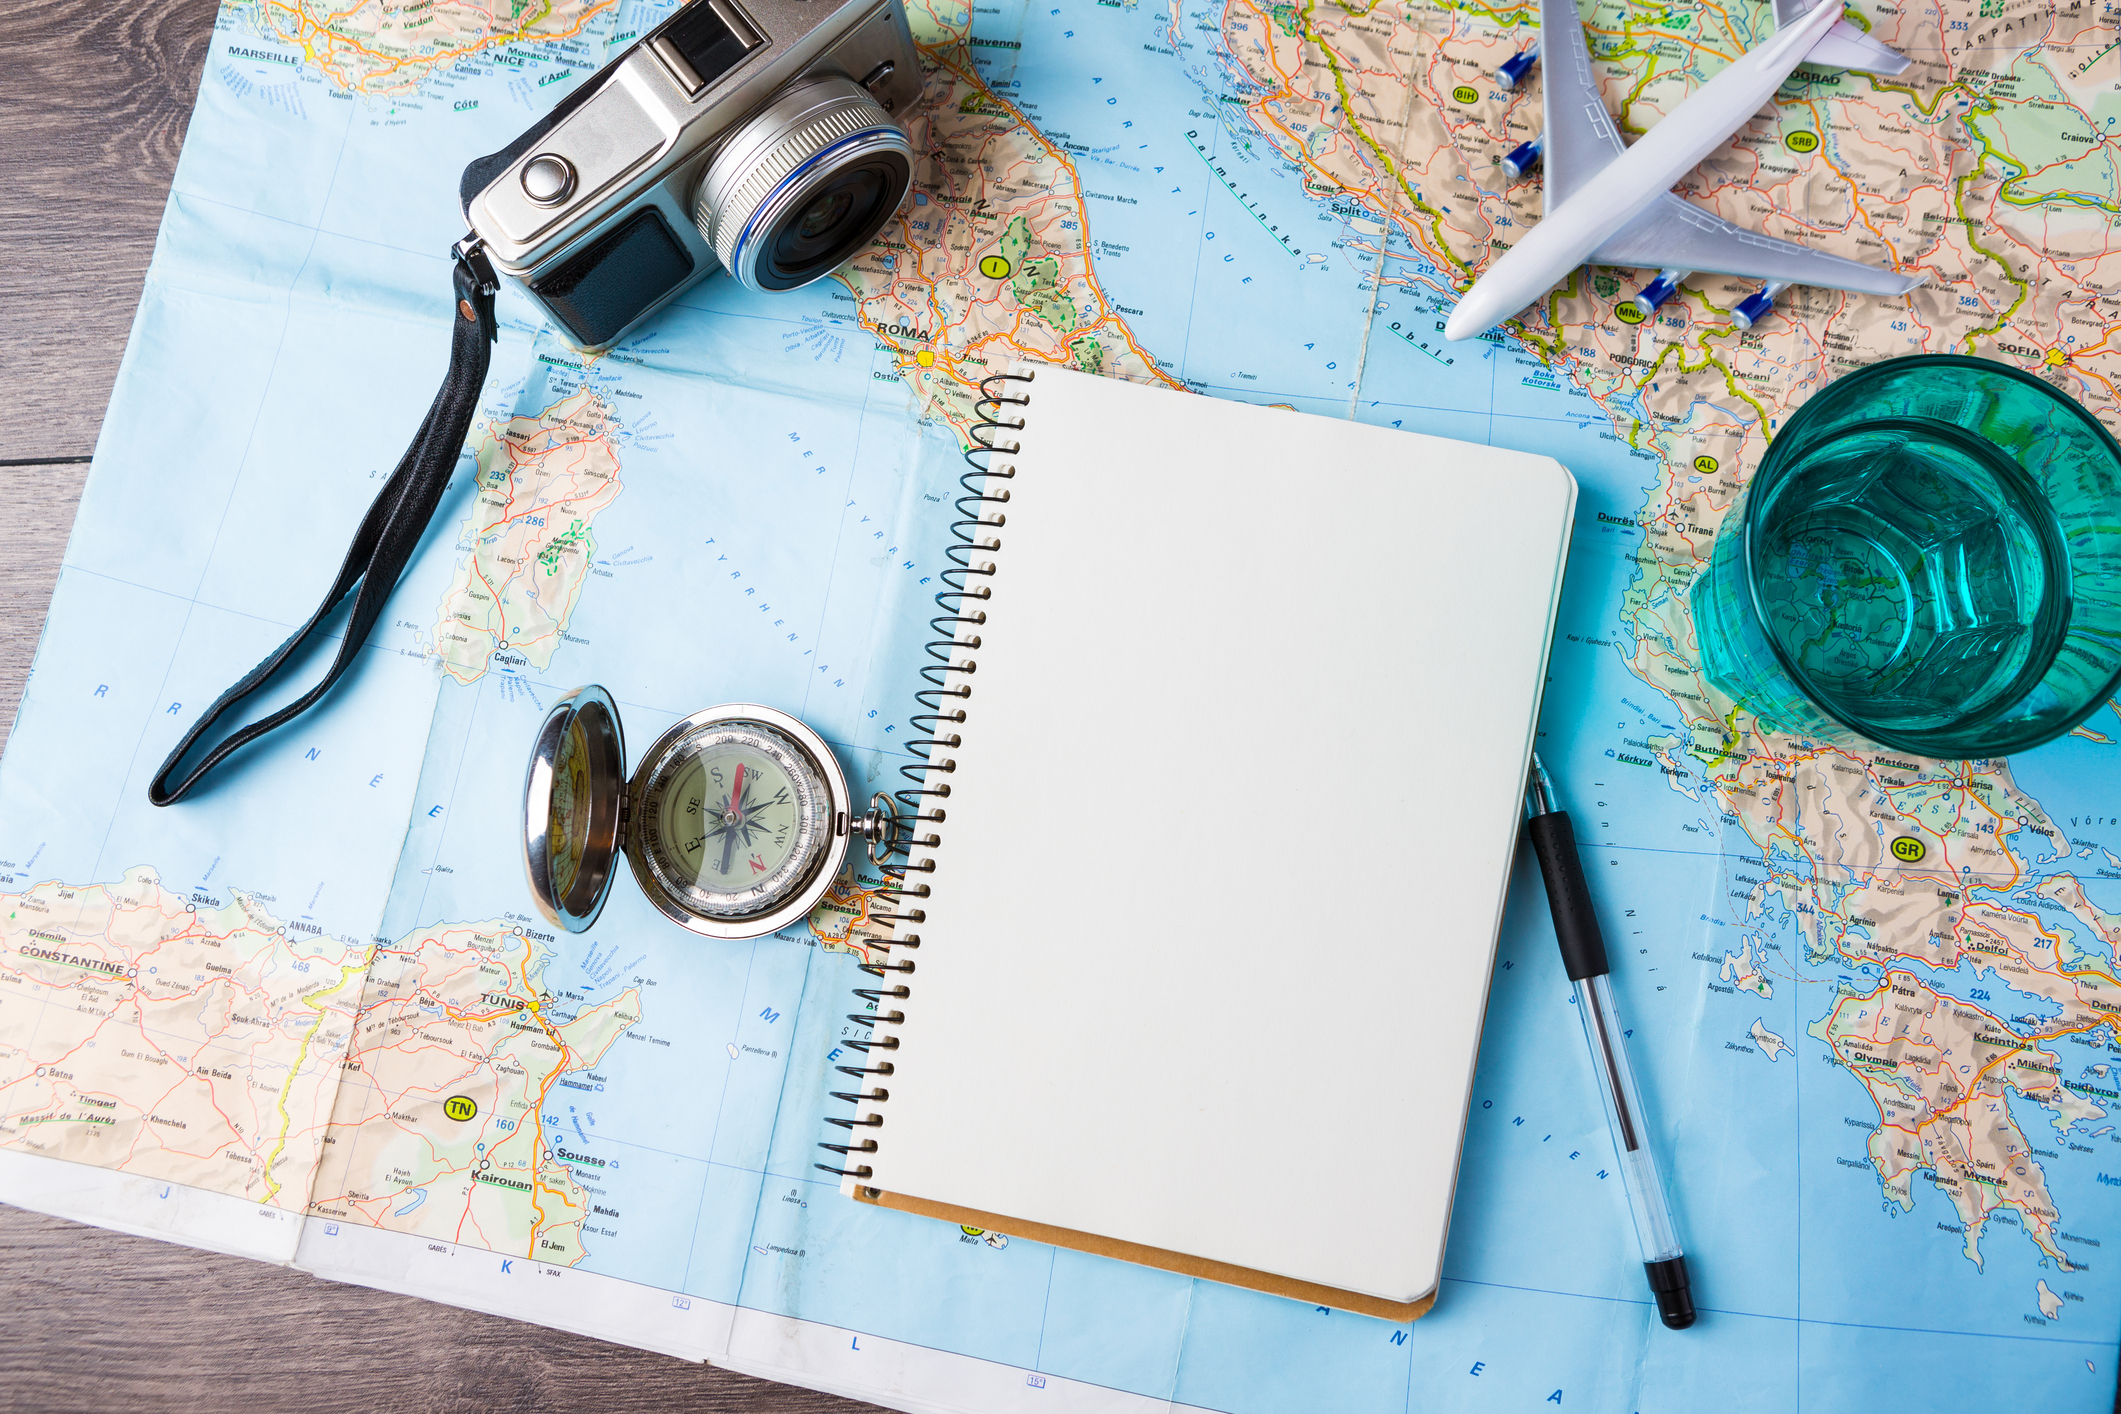 14 inexpensive & essential items to bring on your trip